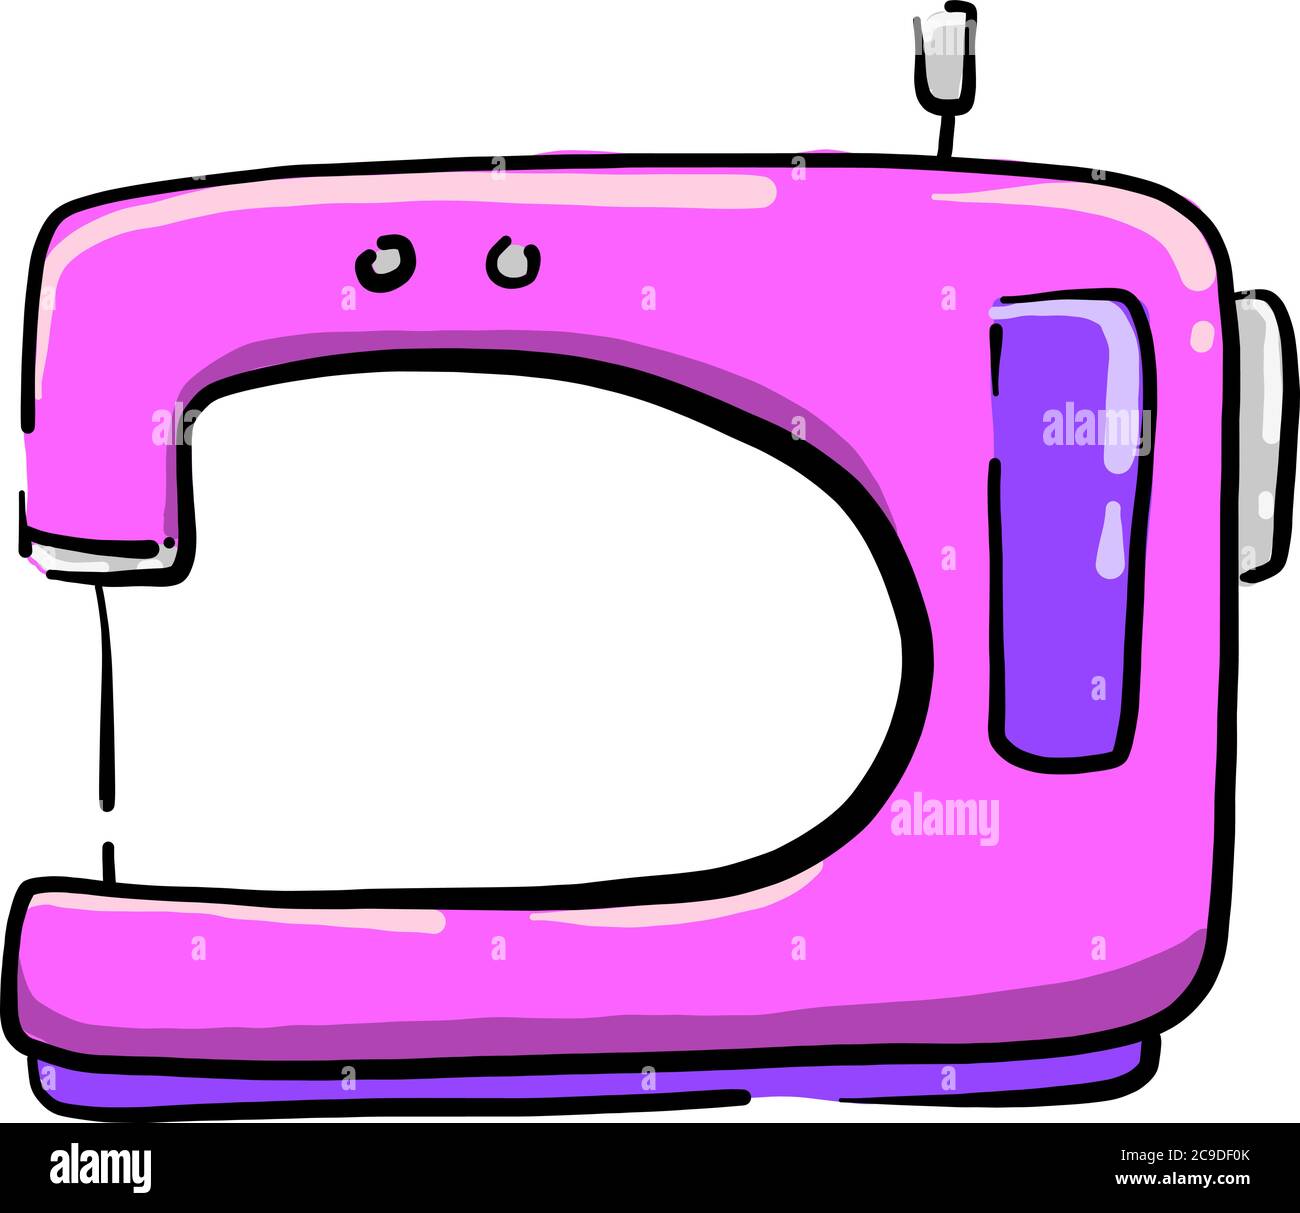 Sewing machine, illustration, vector on white background Stock Vector